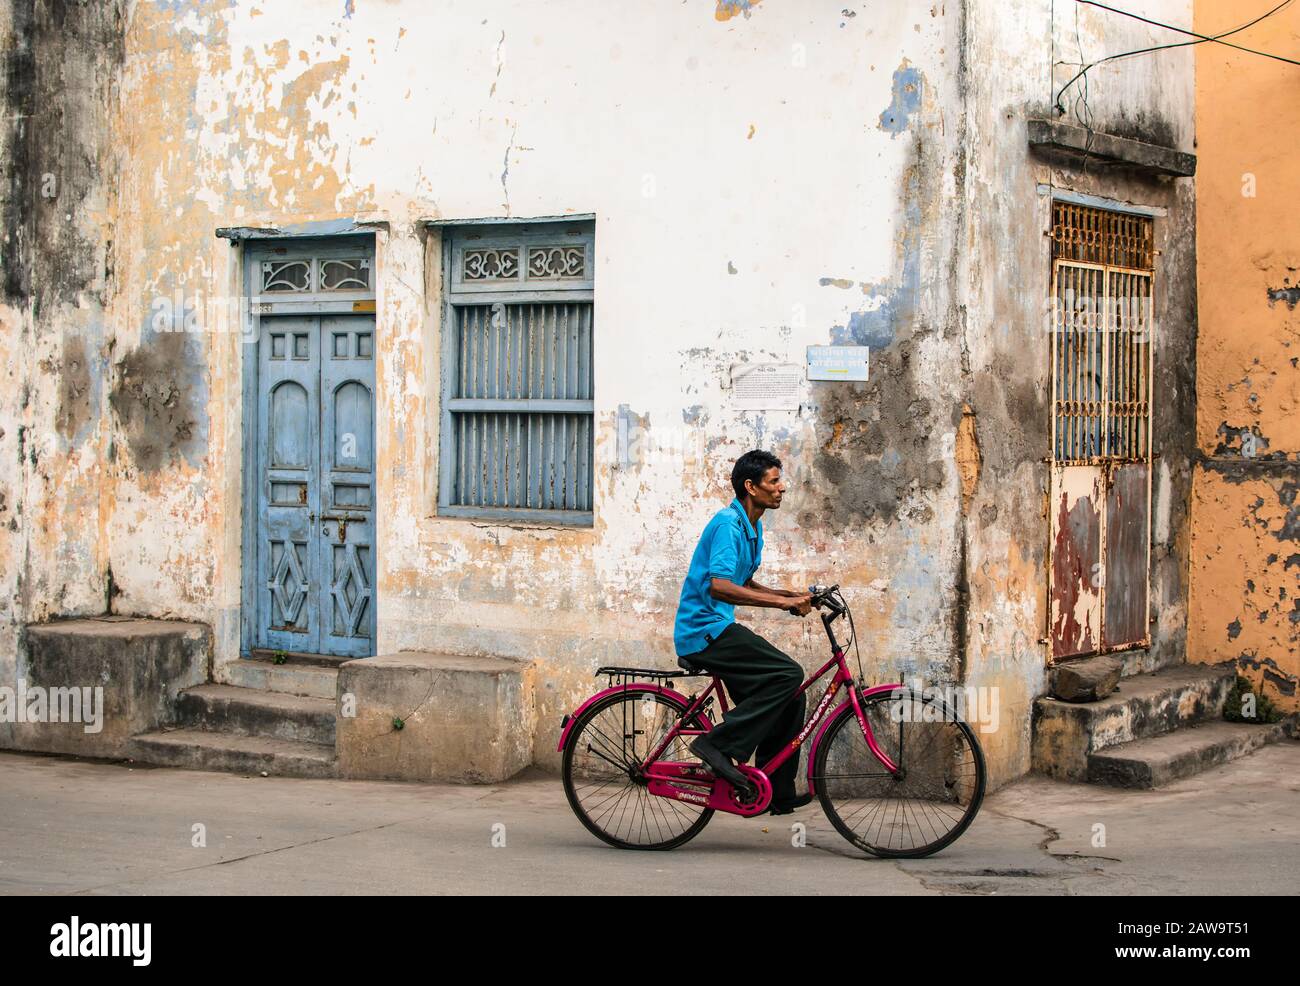 A man rides a bicycle past the decaying walls and quaint wooden doors and windows of old houses in the streets of the island of Diu in India. Stock Photo